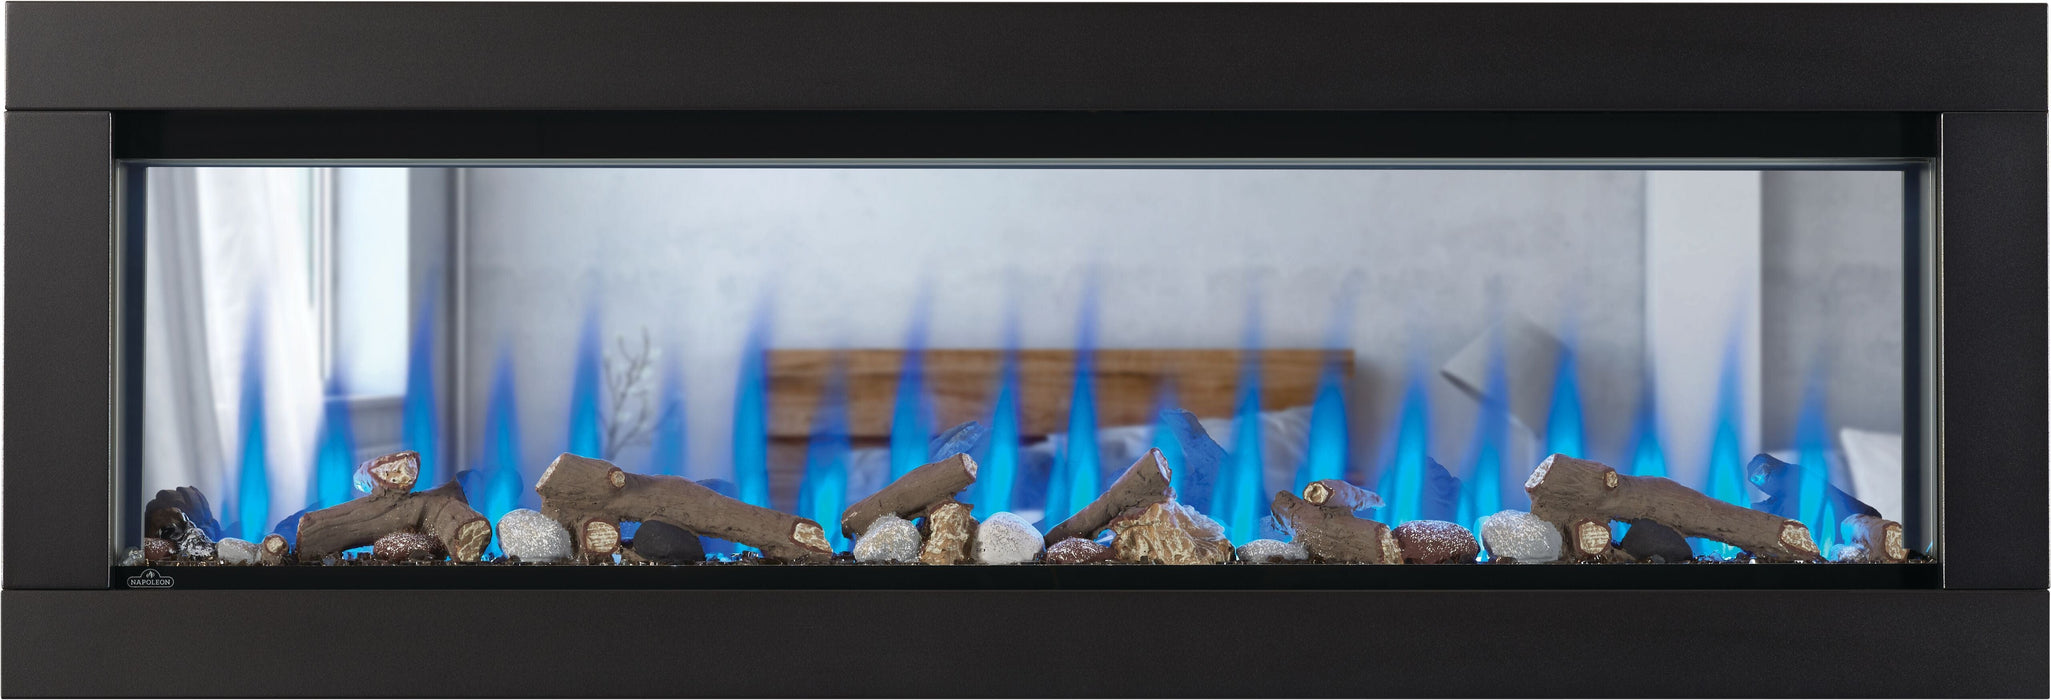 Napoleon Napoleon CLEARion Elite 60" See Through Built-in Electric Fireplace NEFBD60HE Canada Electric NEFBD60HE Built-In Electric Fireplace 629169079896